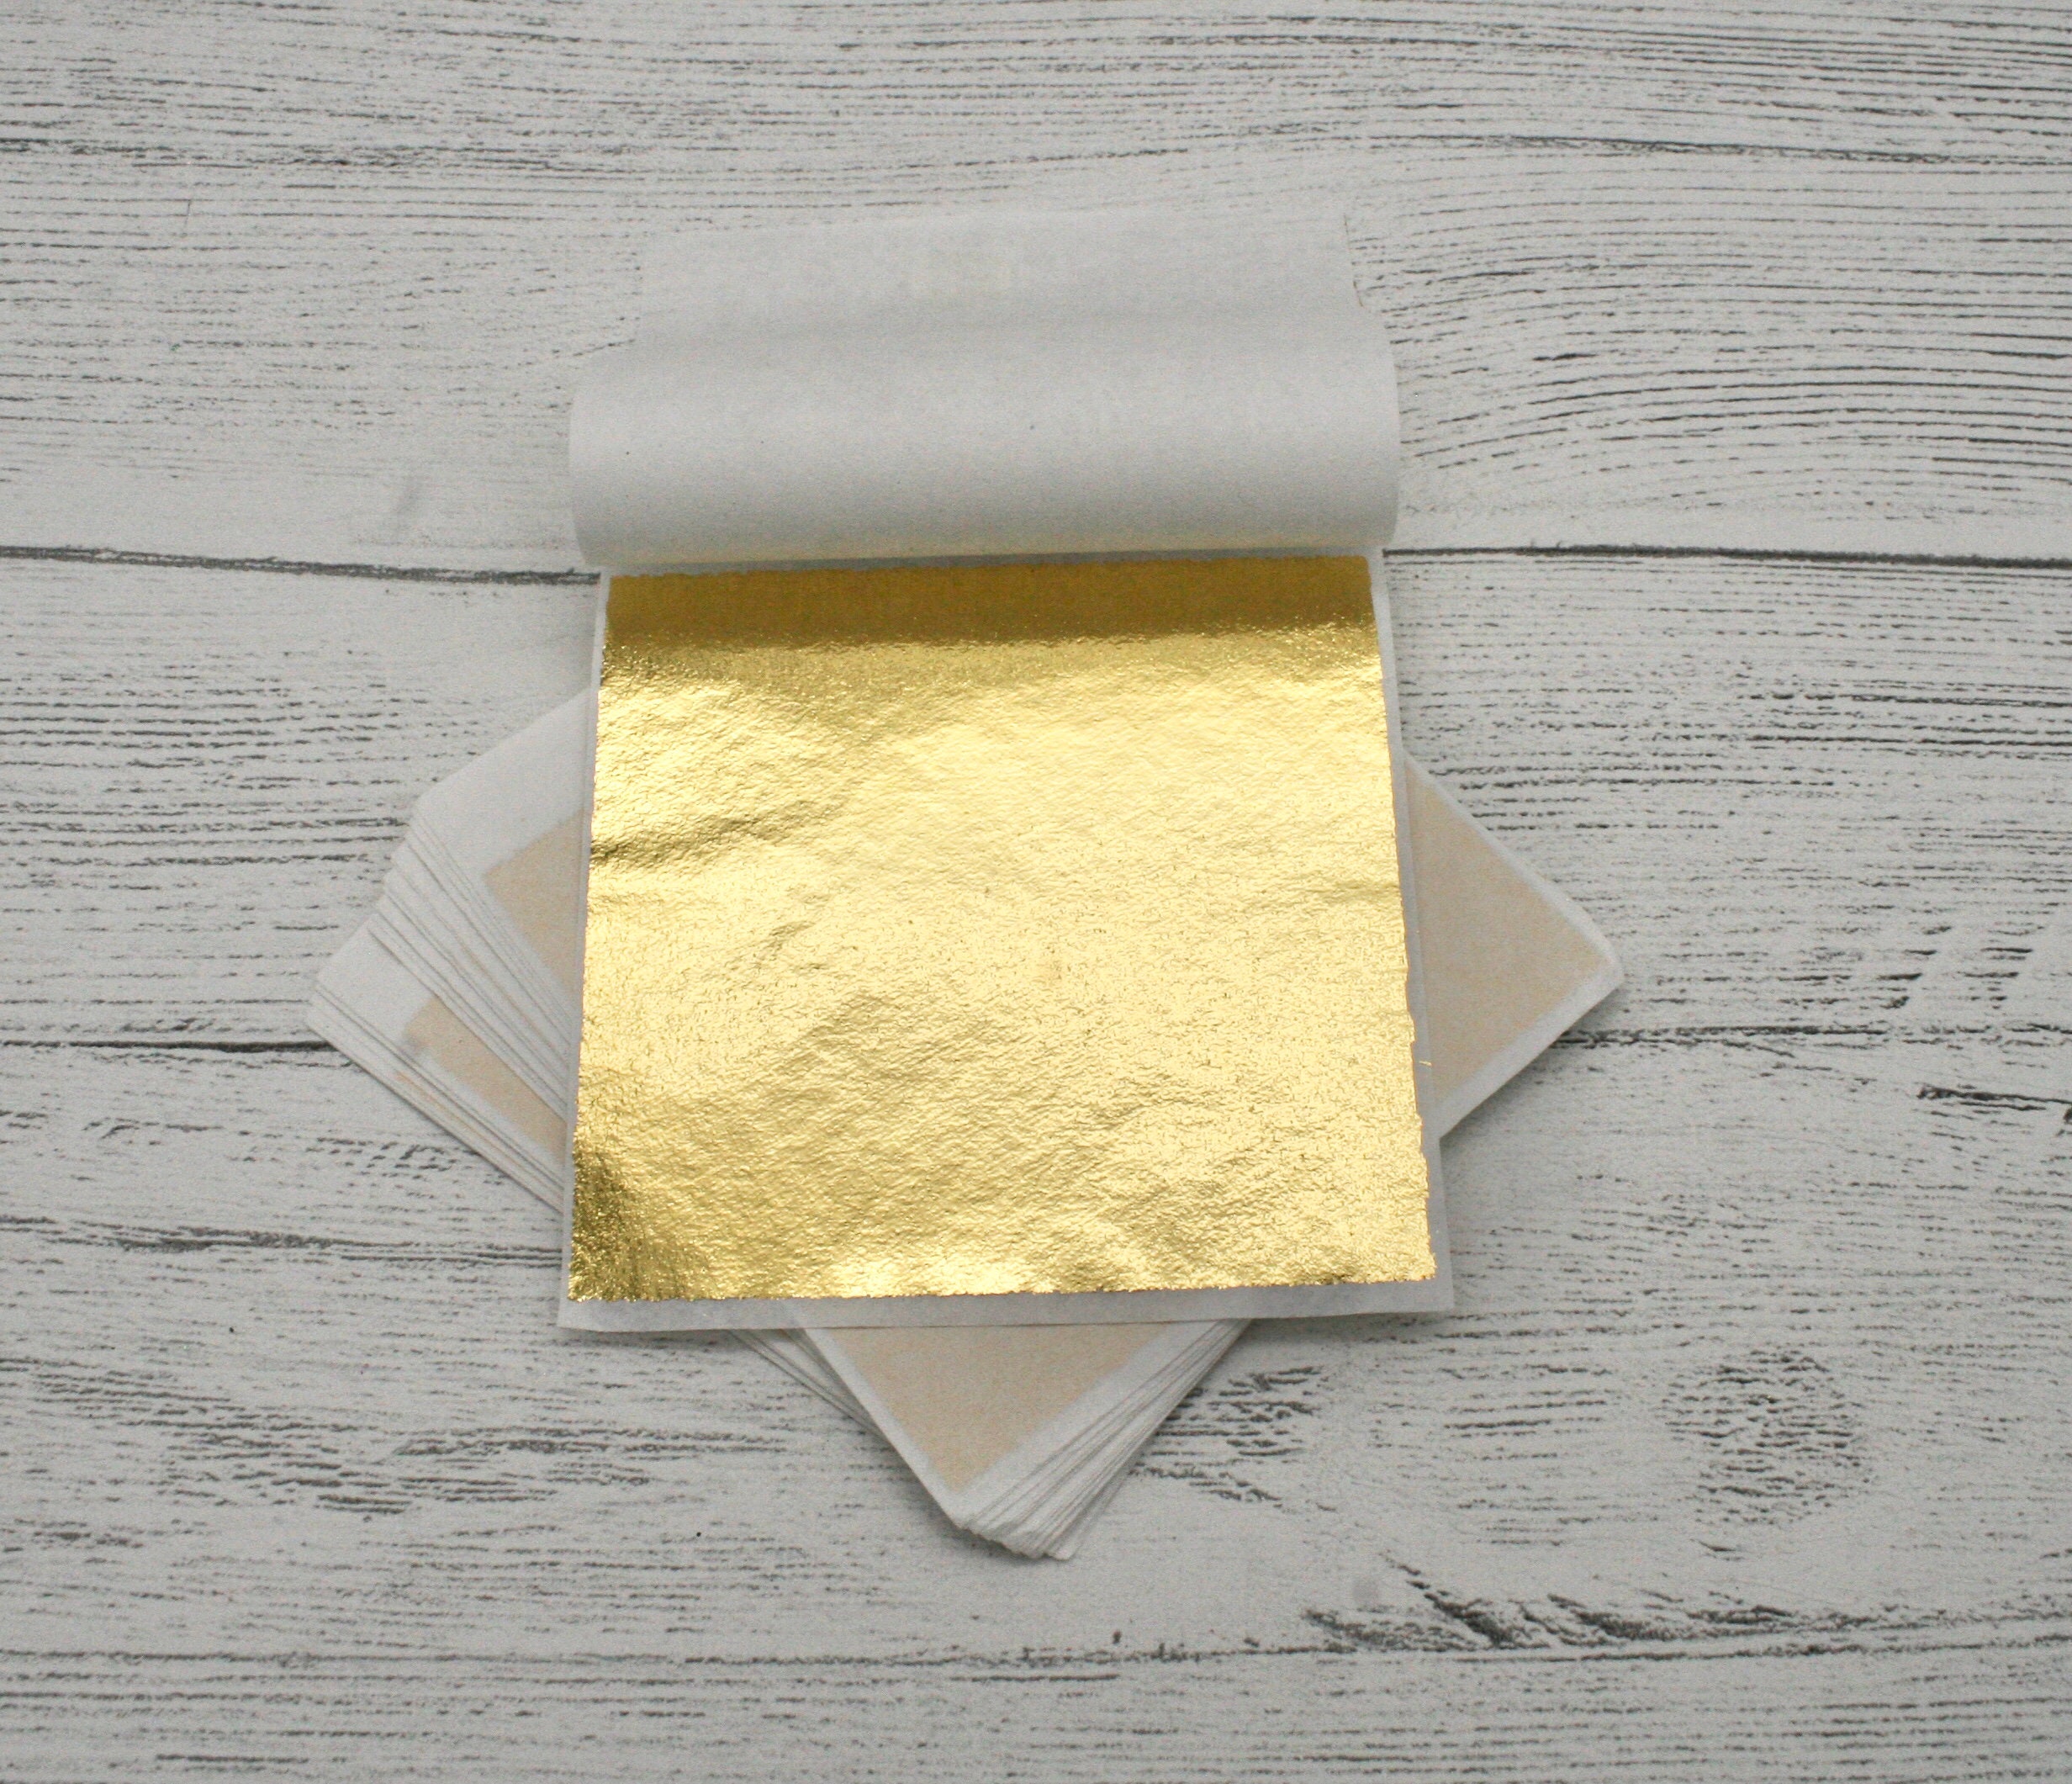 Champagne Silver Imitation Gold Leaf Foil, Resin Supplies, Nail Art  Supplies ,foil Sheets, Thin Foil Sheets, Craft Supplies, Guilding 